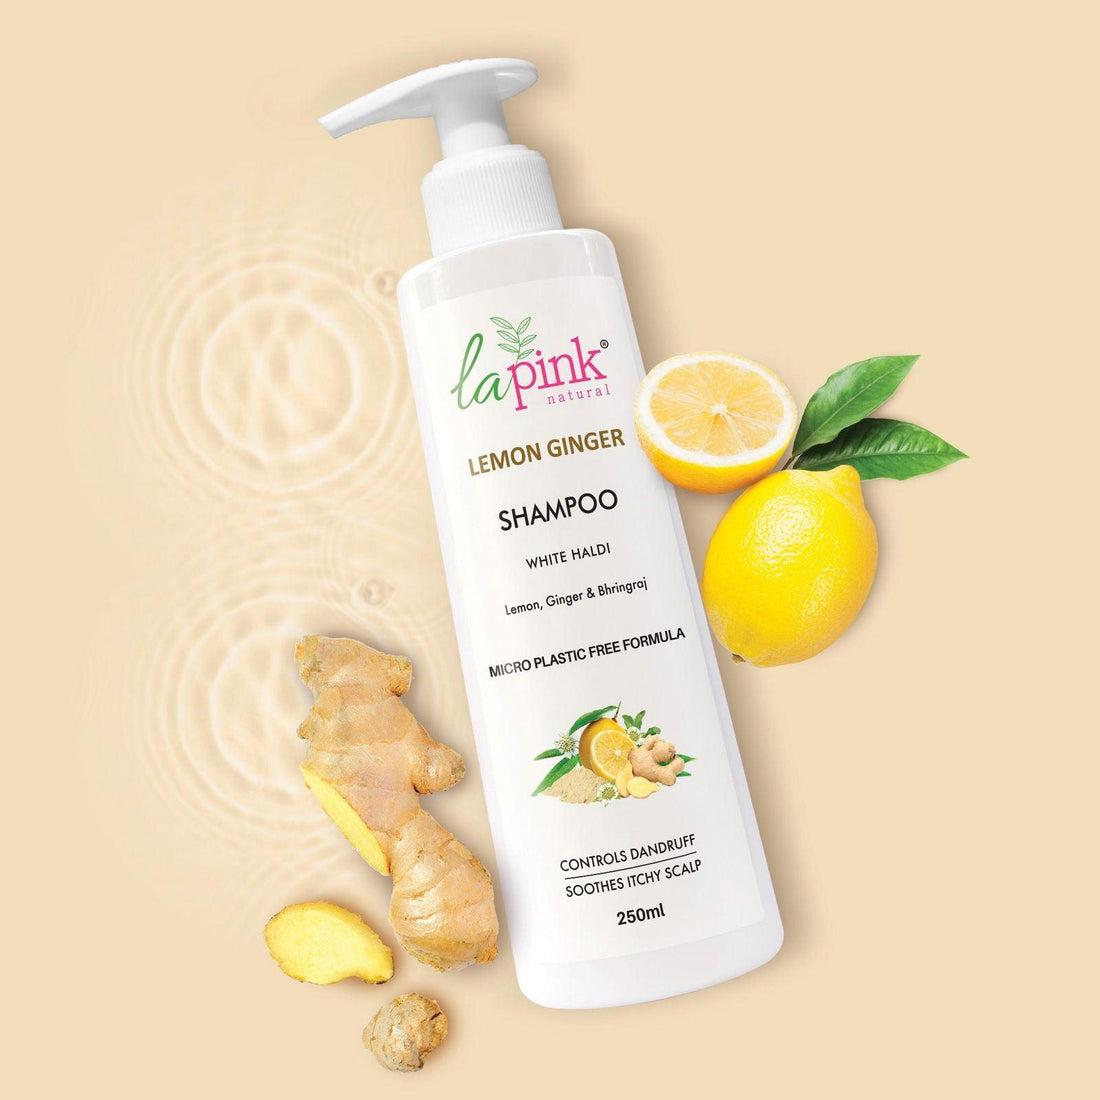 Lemon Ginger Shampoo with White Haldi to Control Dandruff &amp; Soothe Itchy Scalp - La Pink